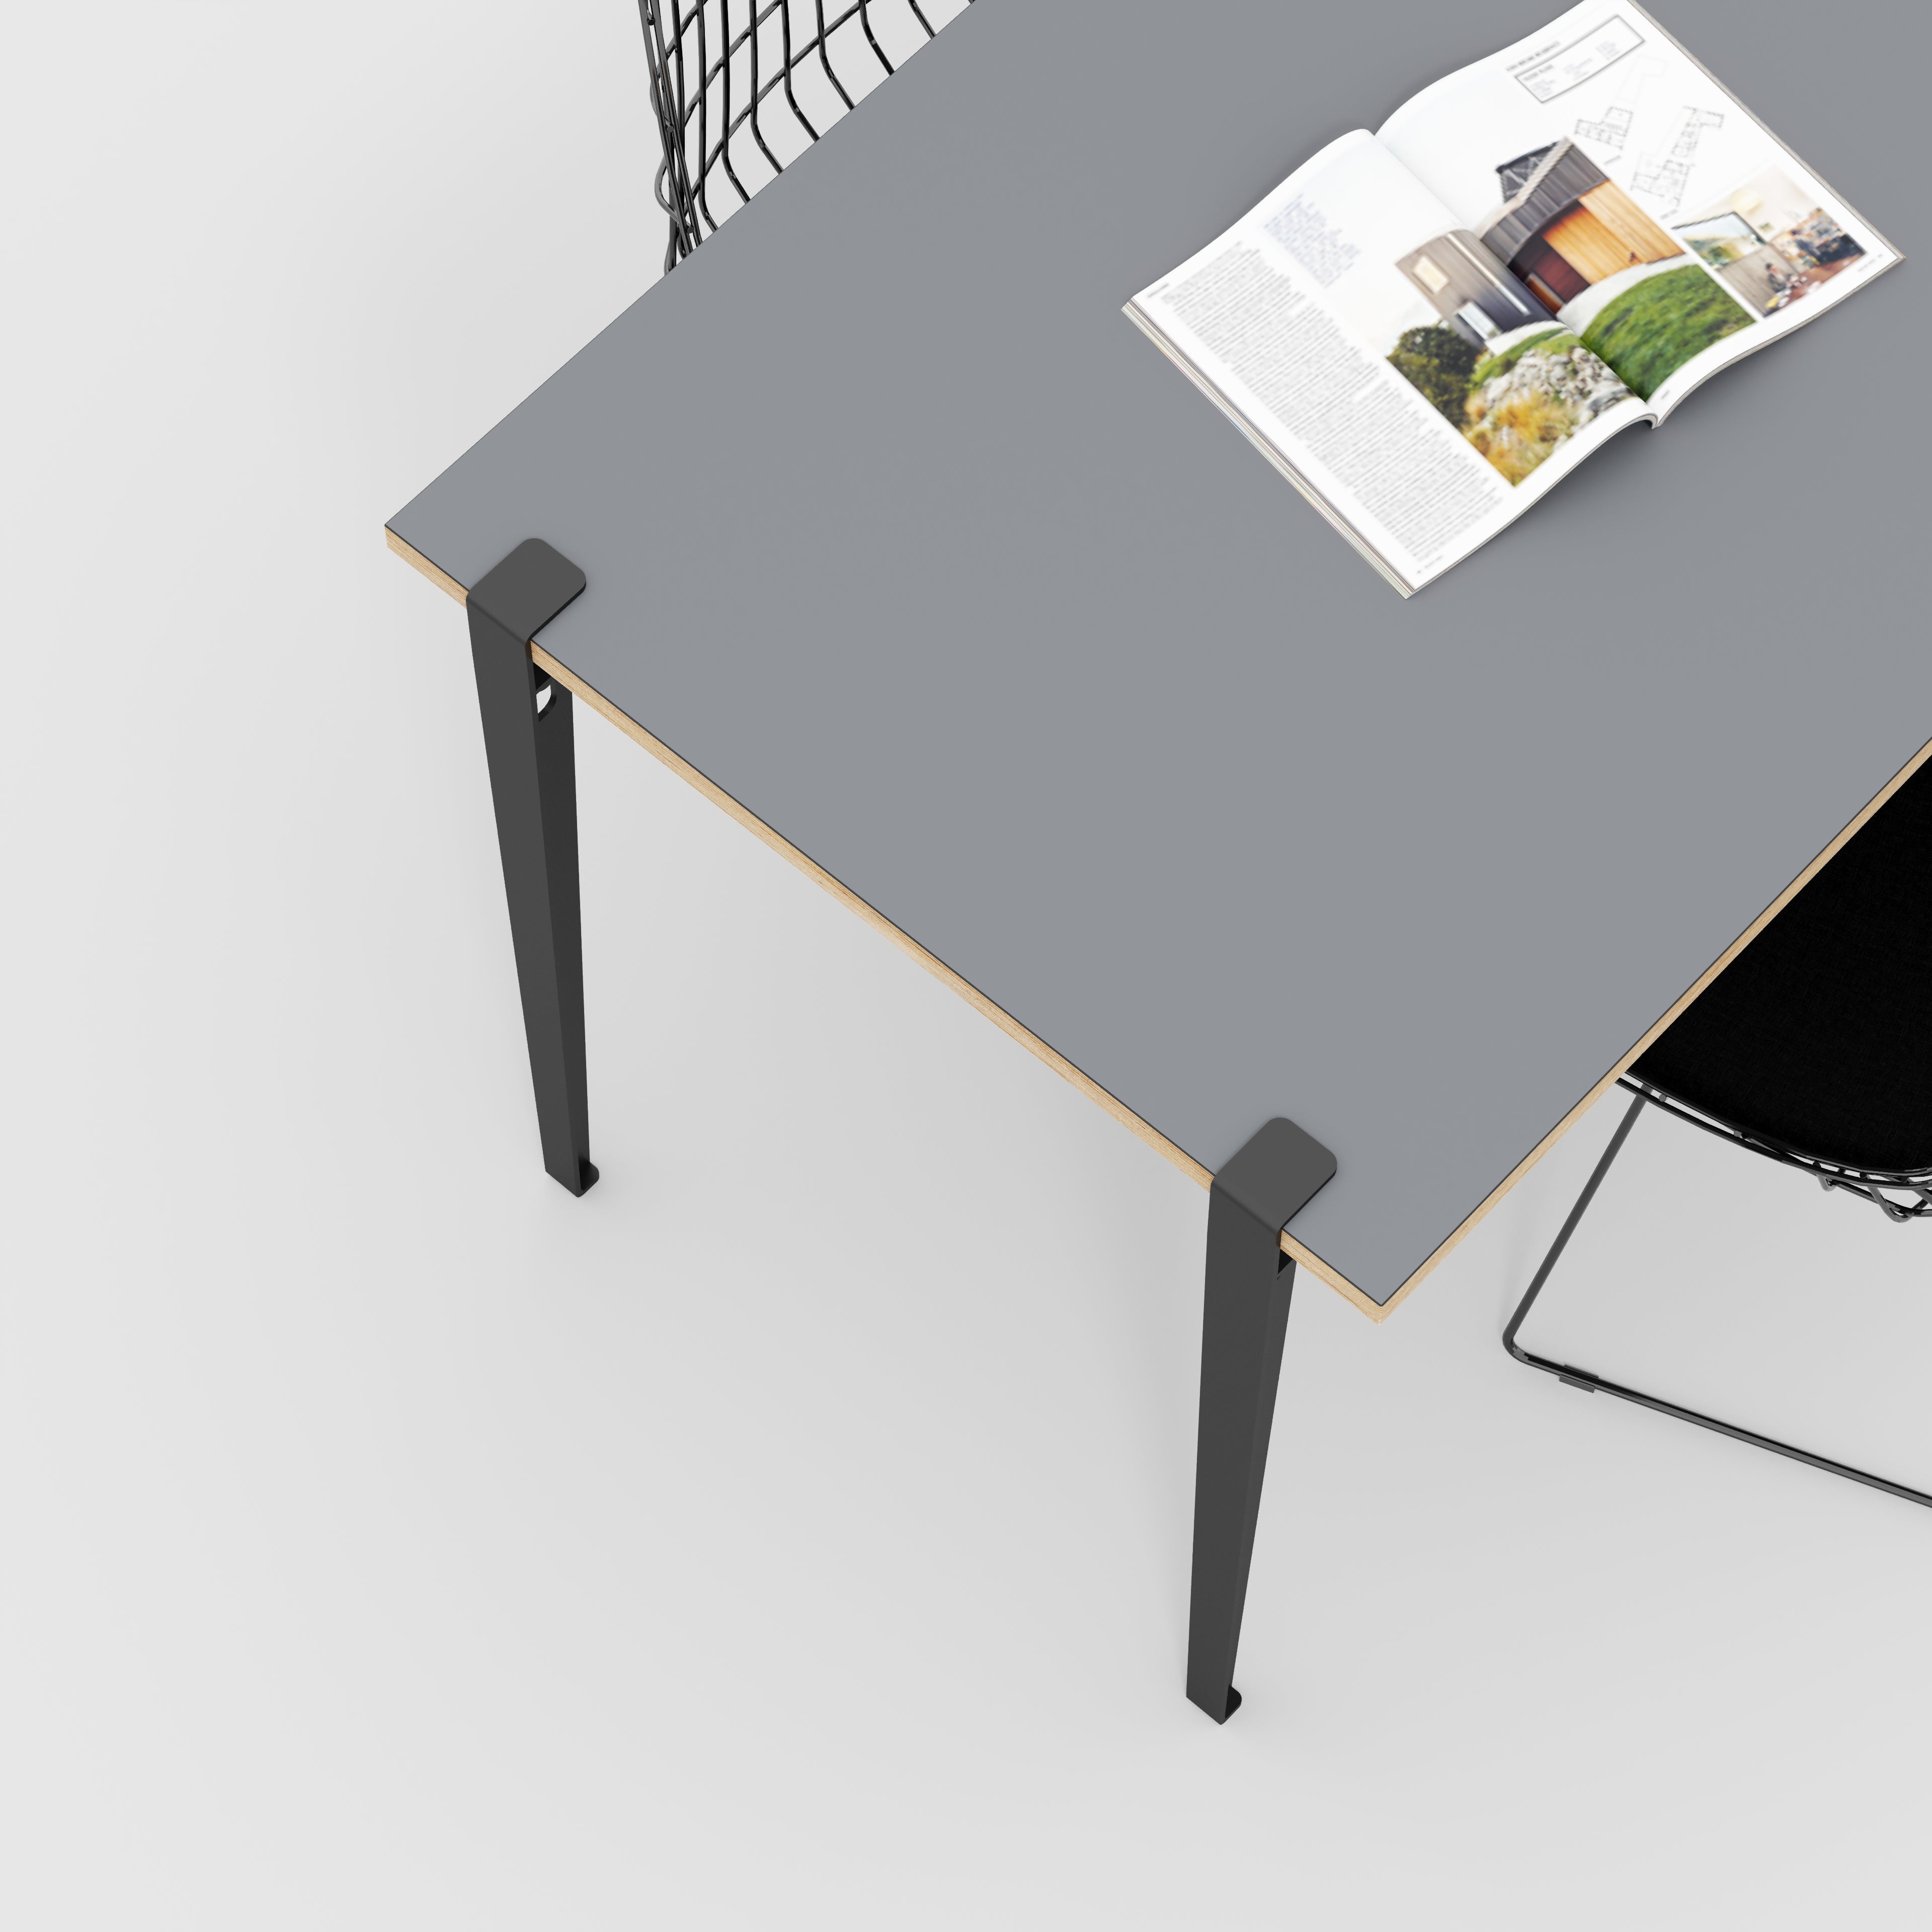 Wall Table with Black Tiptoe Legs and Brackets - Formica Tornado Grey - 1200(w) x 800(d) x 750(h)